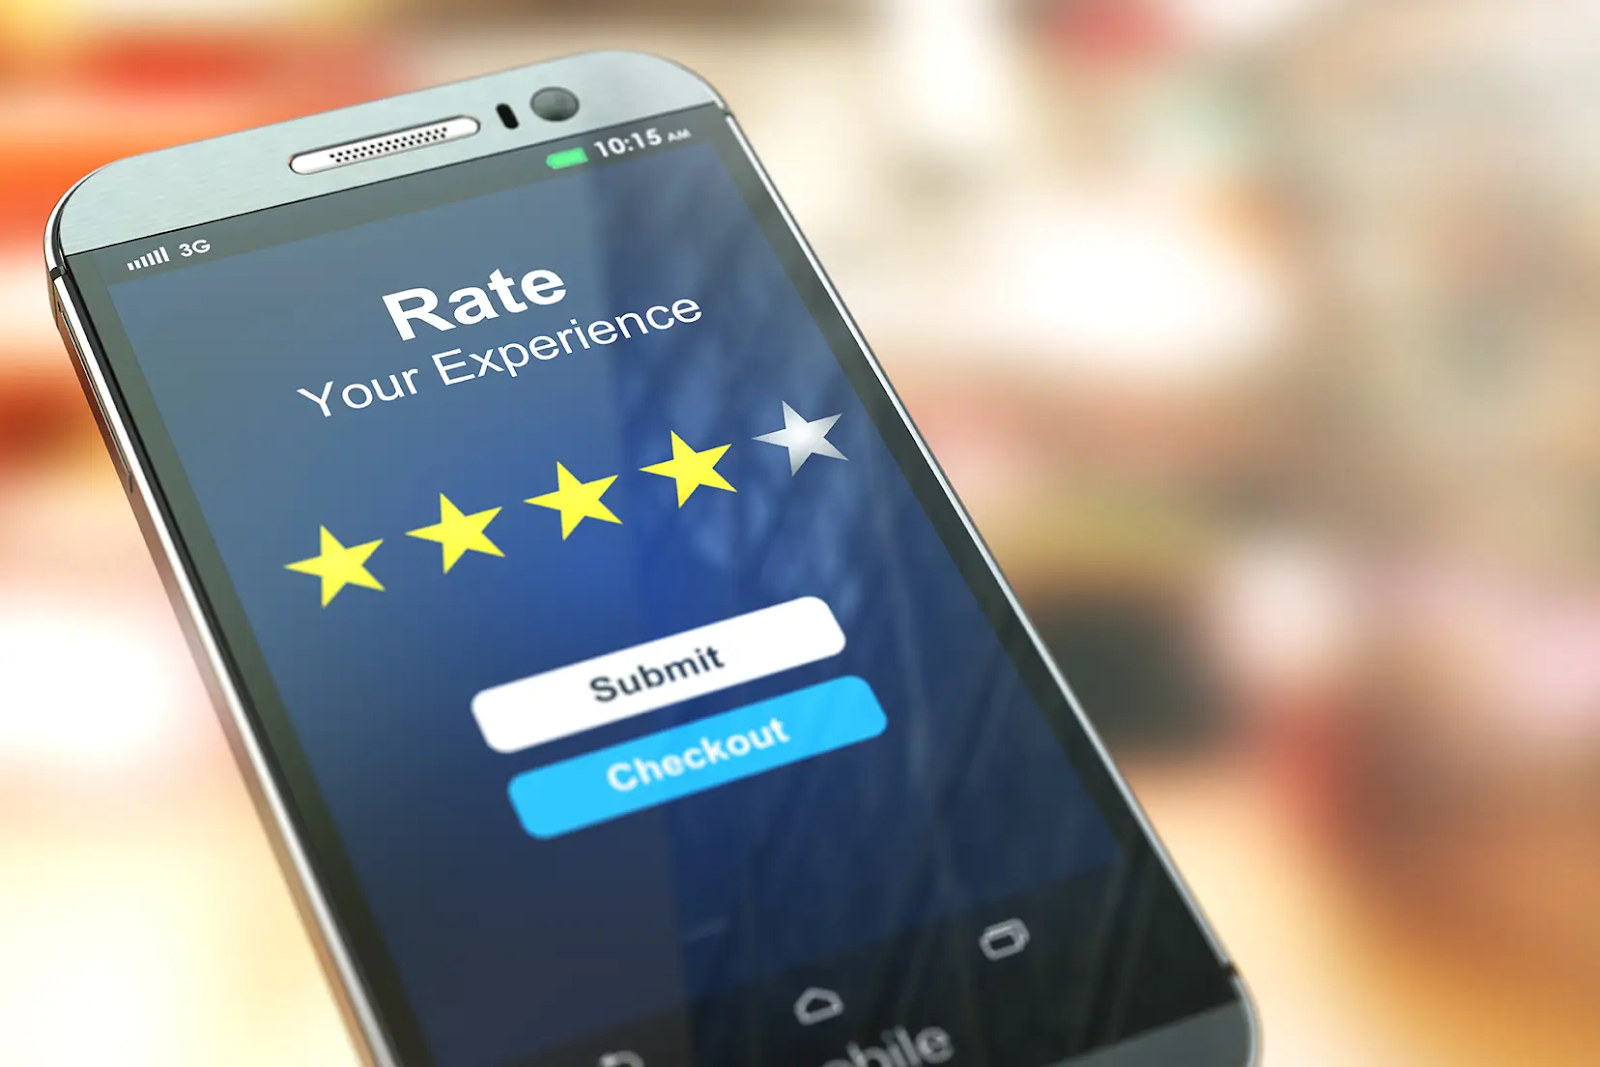 5 Tips on How To Advertise Online For SMEs - Image of a mobile phone displaying option to rate your experience with 4 stars highlighted and the option to submit or click checkout